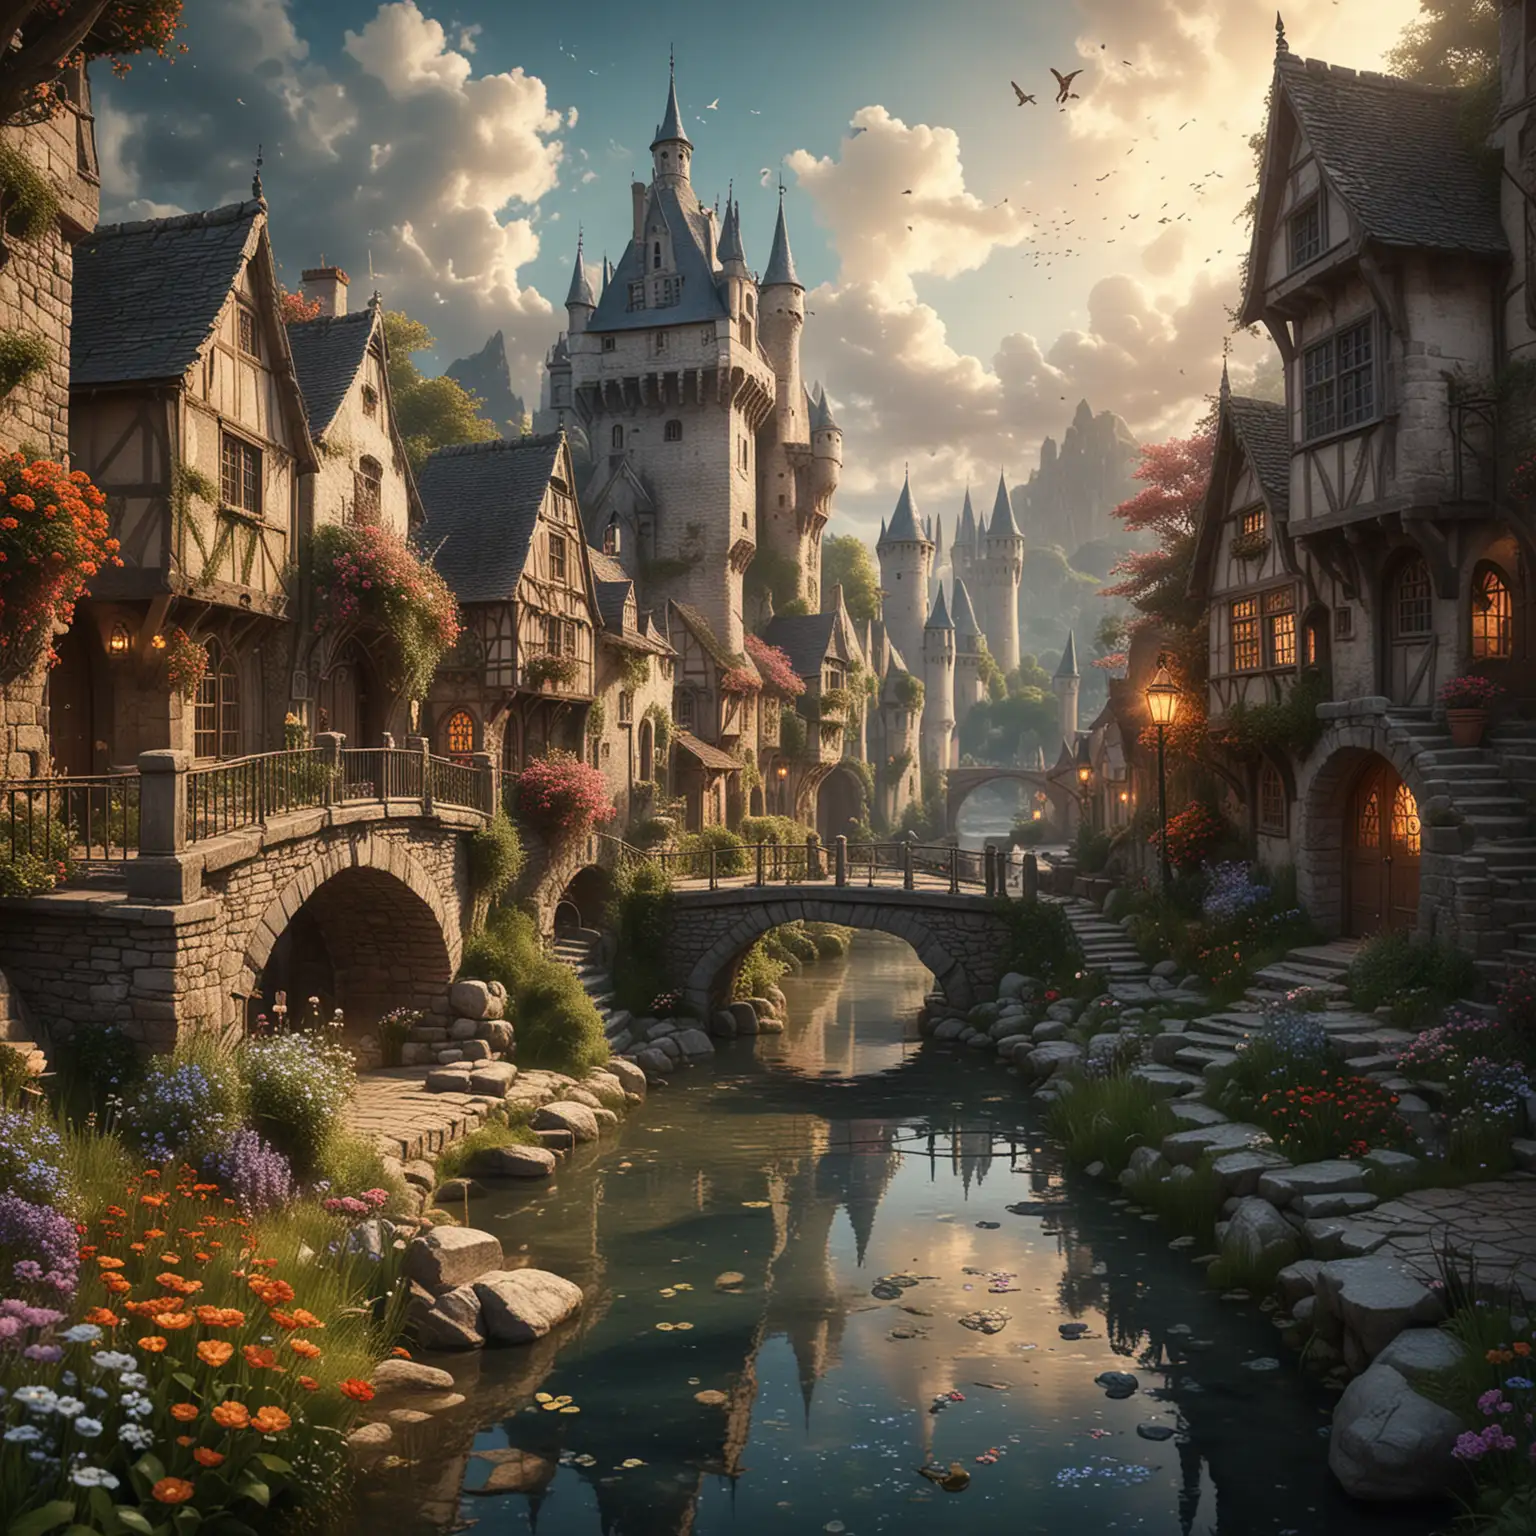 A realistic beautiful, magical image of breathtaking, an enchanted world with different distinct regions with magical elements. The scene includes a variety of beautiful flowers There are medieval castles with high towers and stone bridges, charming villages with cobbled streets and peculiar cottages, all connected by a crystal clear river. The atmosphere is filled with fairy dust floating in the air and magical creatures such as fairies, unicorns and gracefully moving dragons. The sky is a mixture of shades